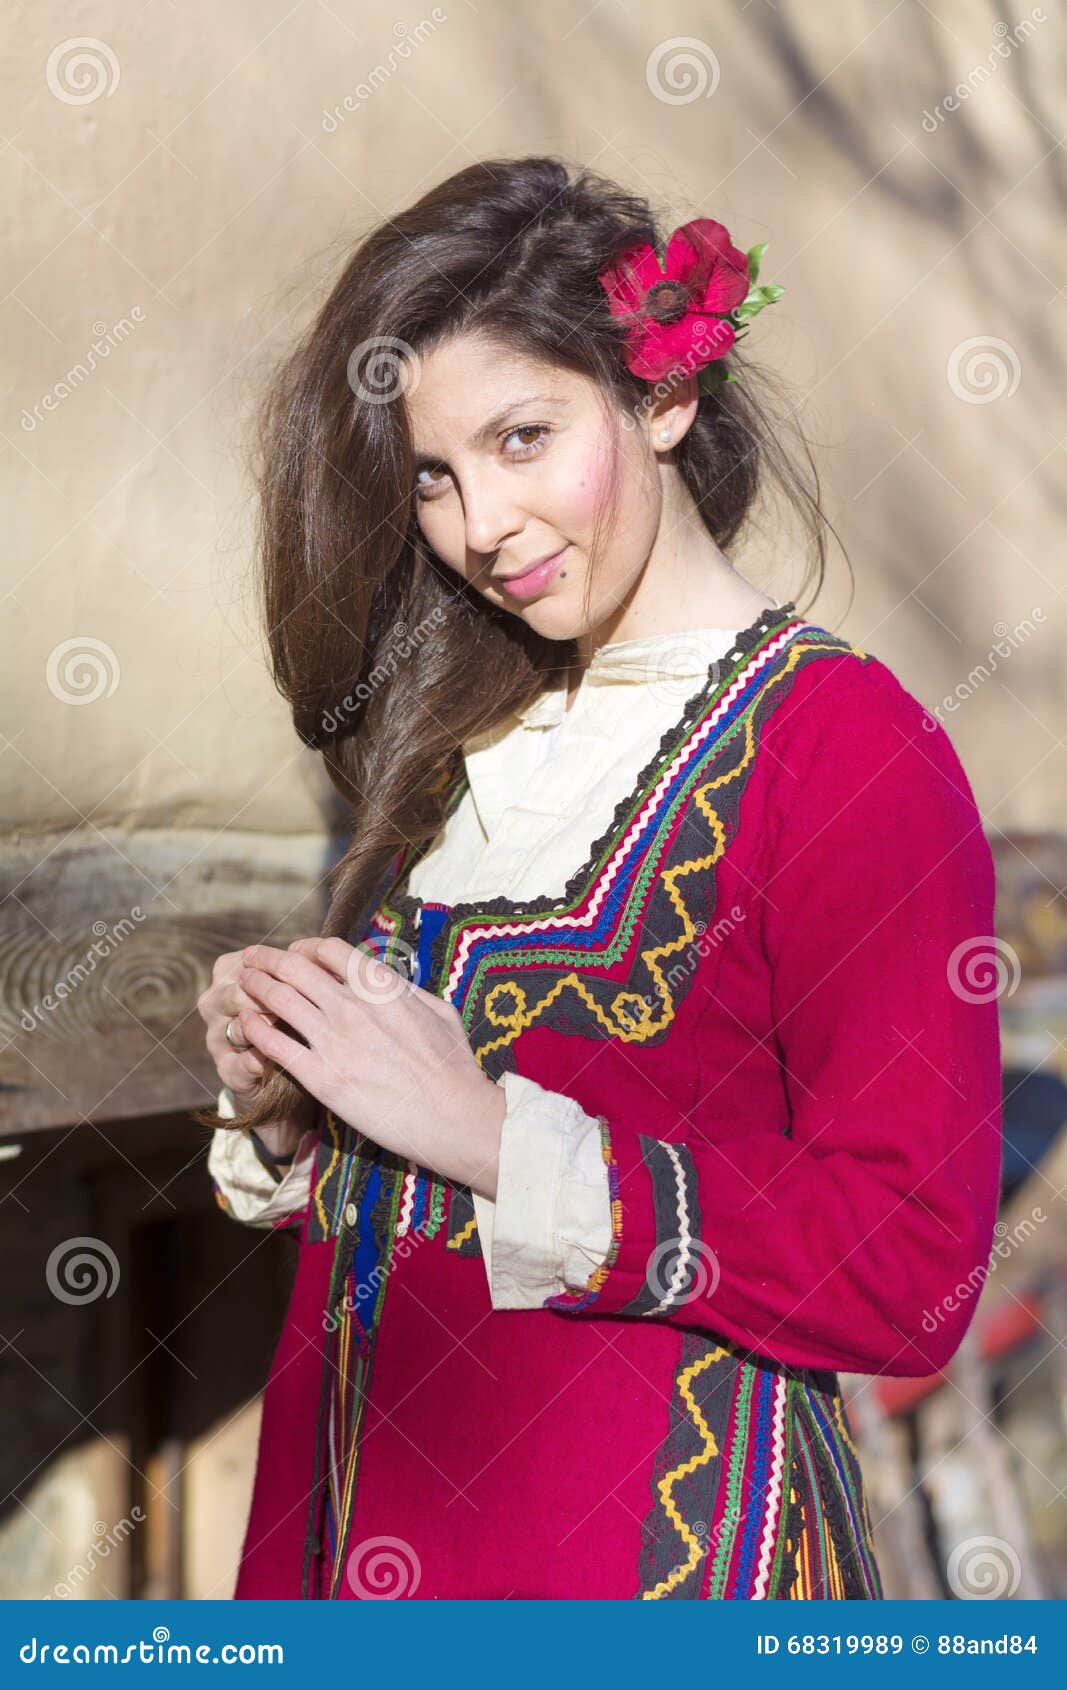 Beautiful Young Smiling Woman with Balkan Folk Red Costume Stock Image ...